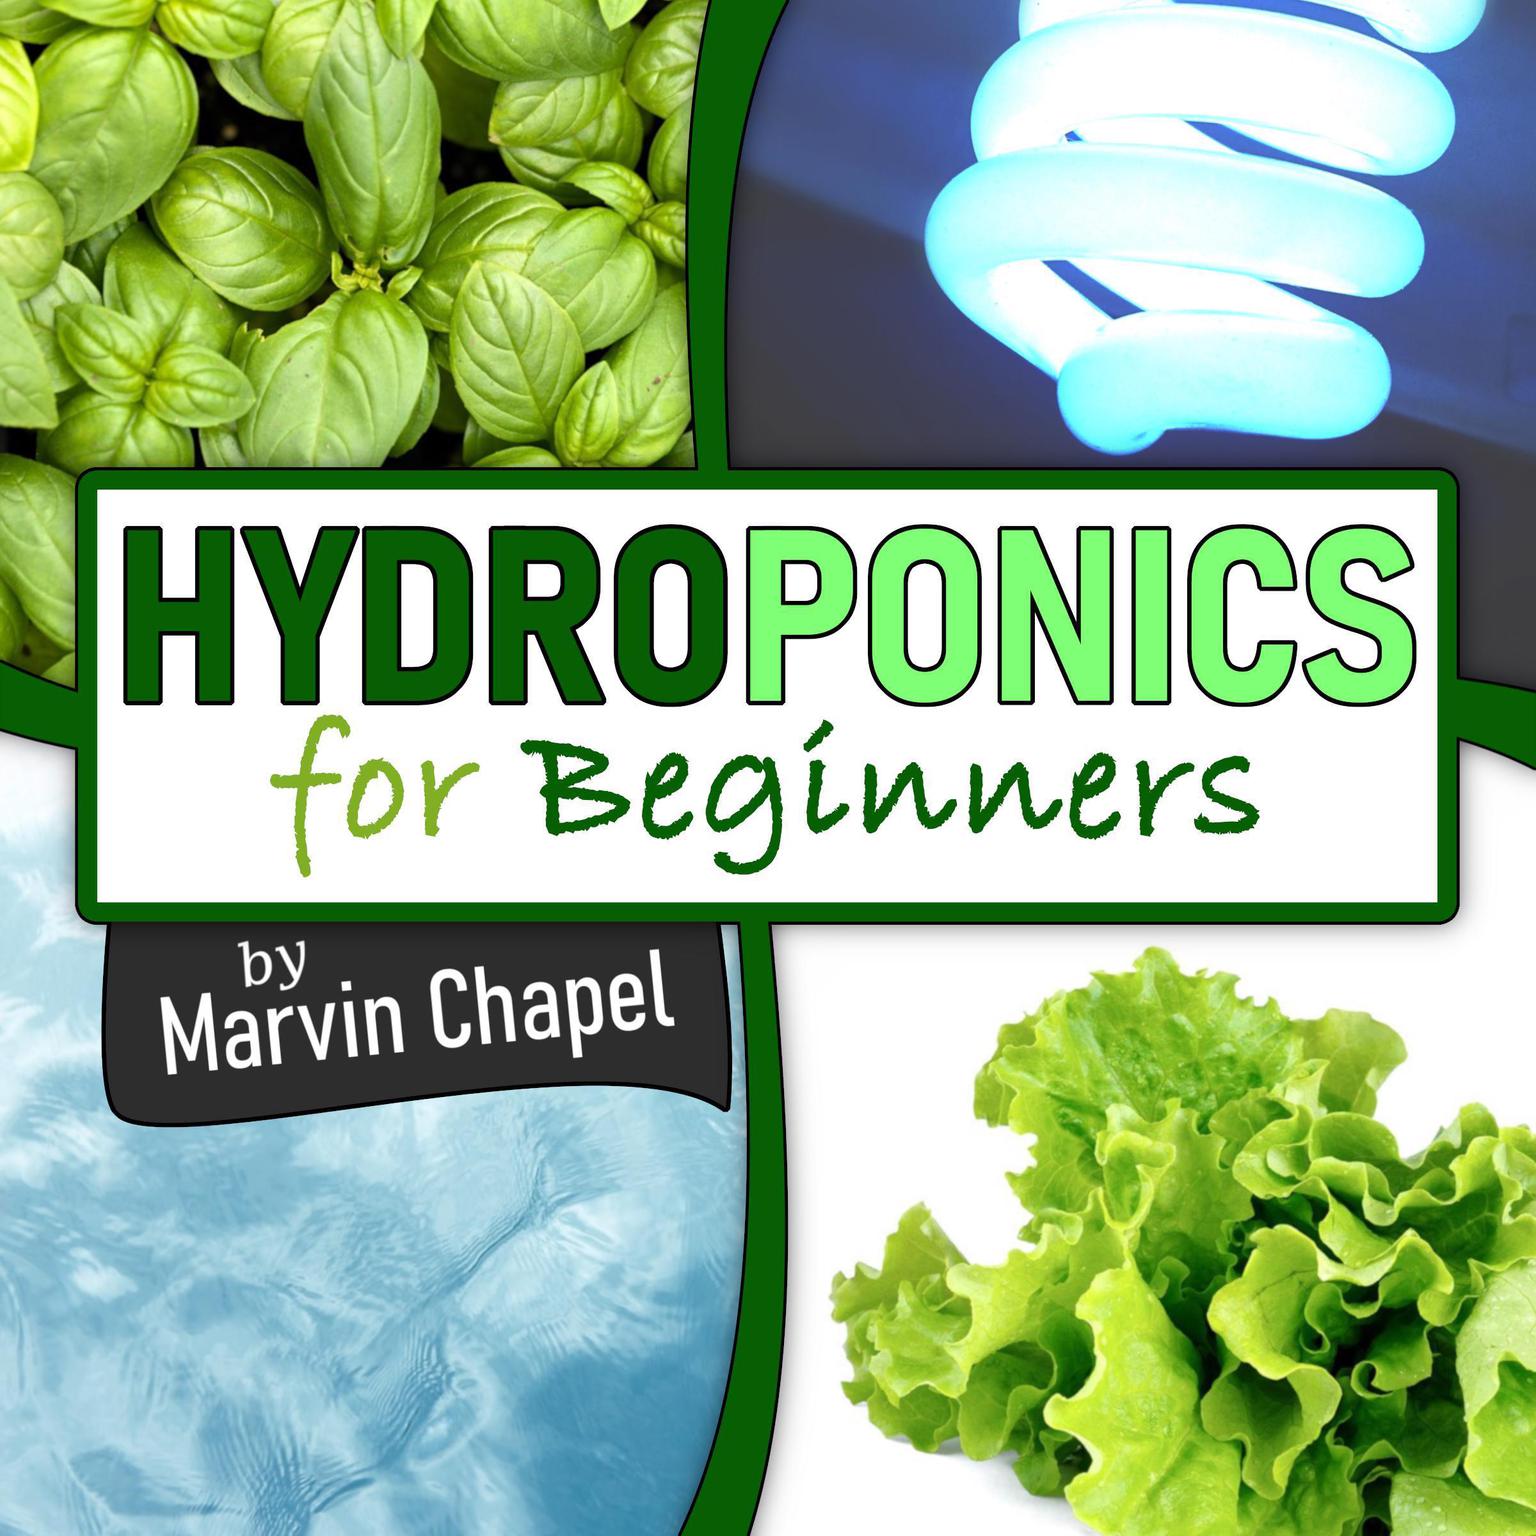 Hydroponics for Beginners: The Complete Step-by-Step Guide to Self-Produce your Flavorful Vegetables, Fruits and Herbs at Home, without Soil, building a Cheap Hydroponic System Audiobook, by Marvin Chapel